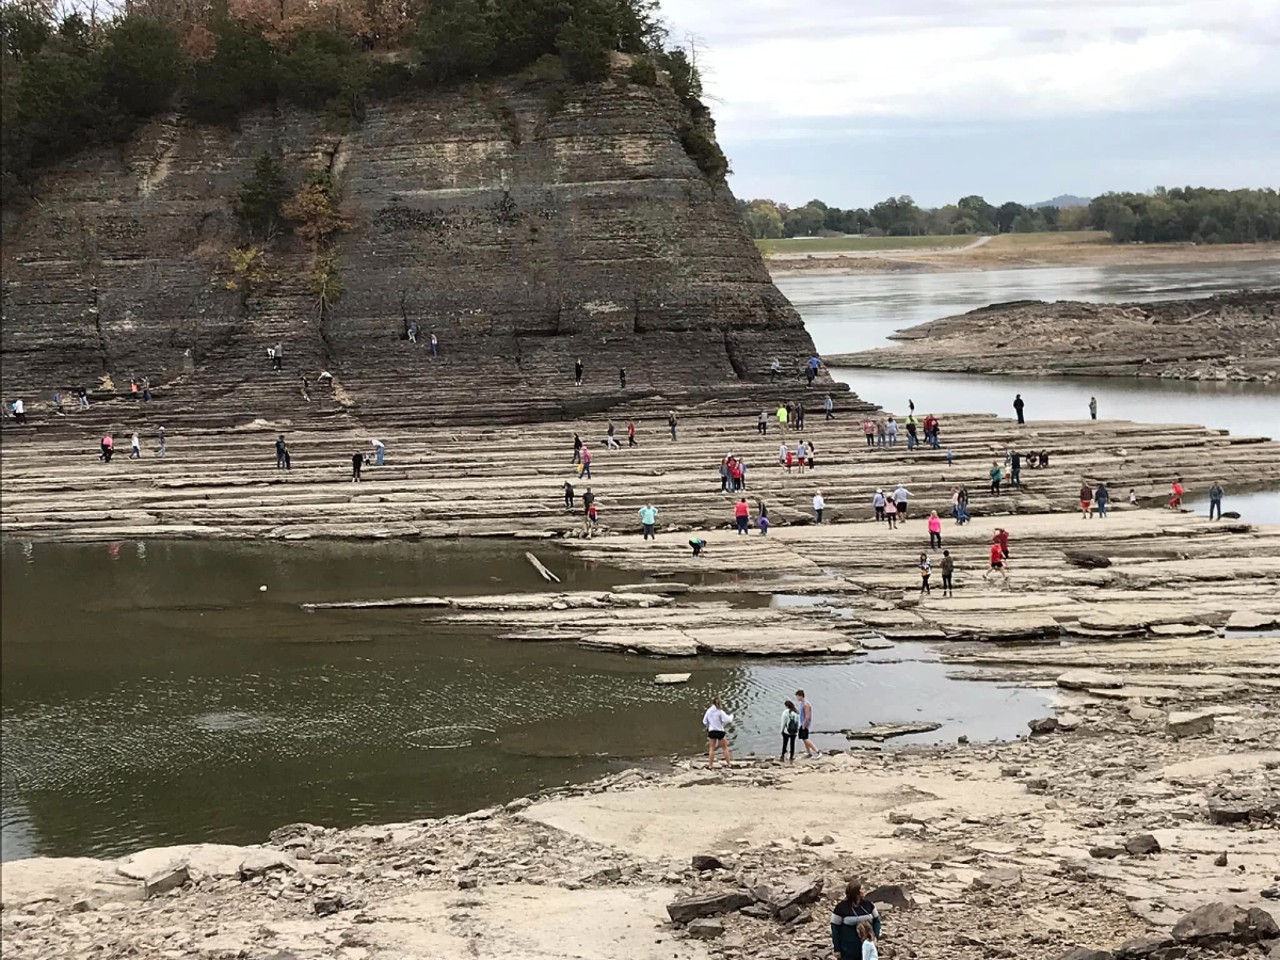 You Can Now Walk To Tower Rock in the Middle of the Mississippi River [PHOTOS]